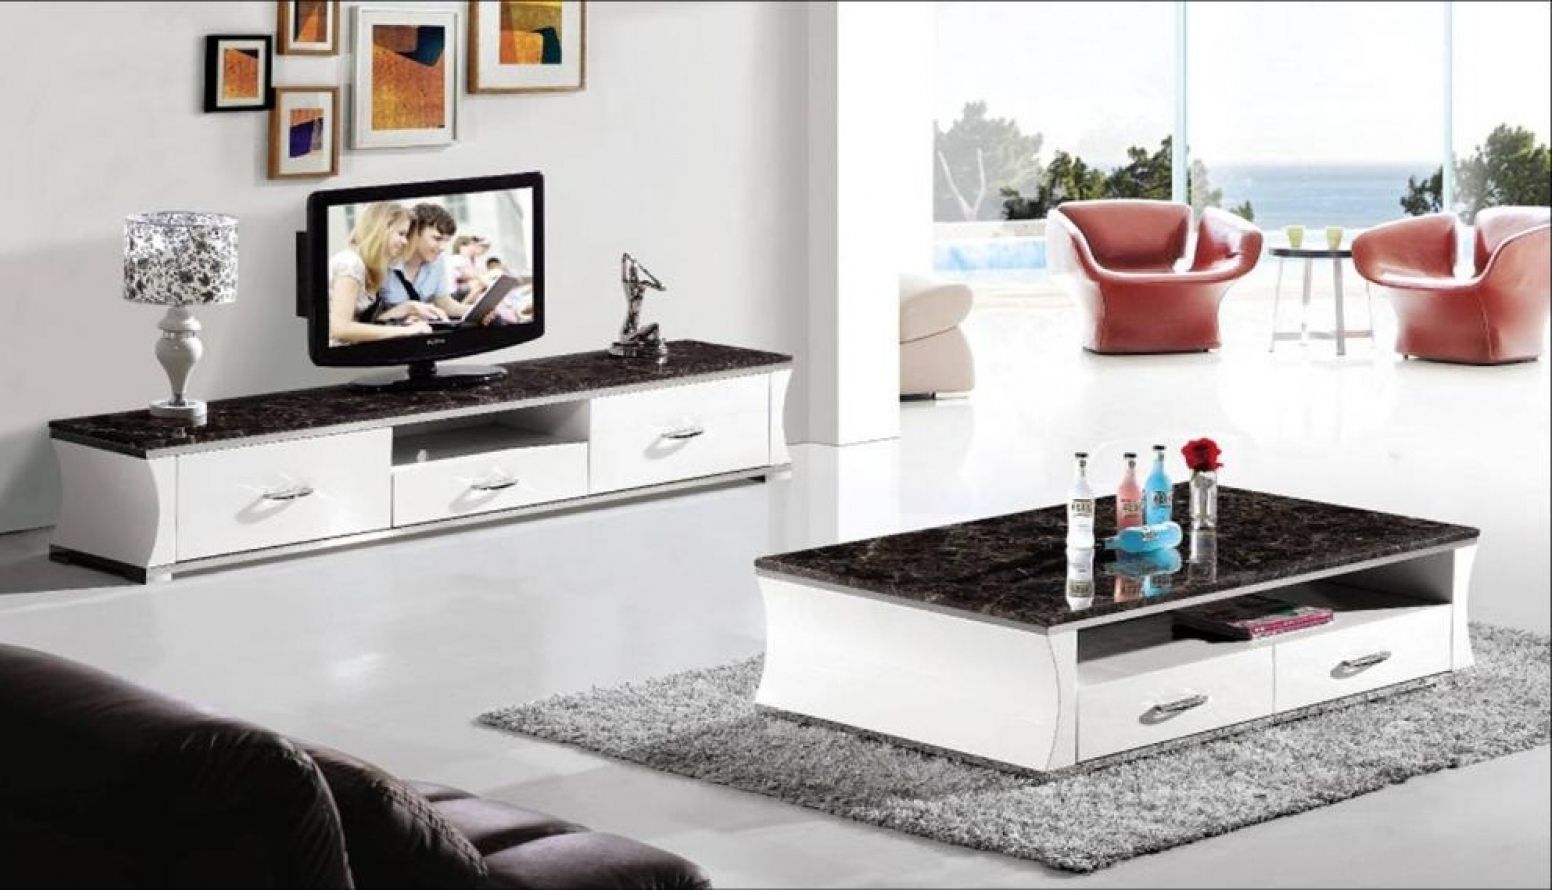 Tv Stand And Coffee Table Set | Roy Home Design In Alden Design Wooden Tv Stands With Storage Cabinet Espresso (View 15 of 15)